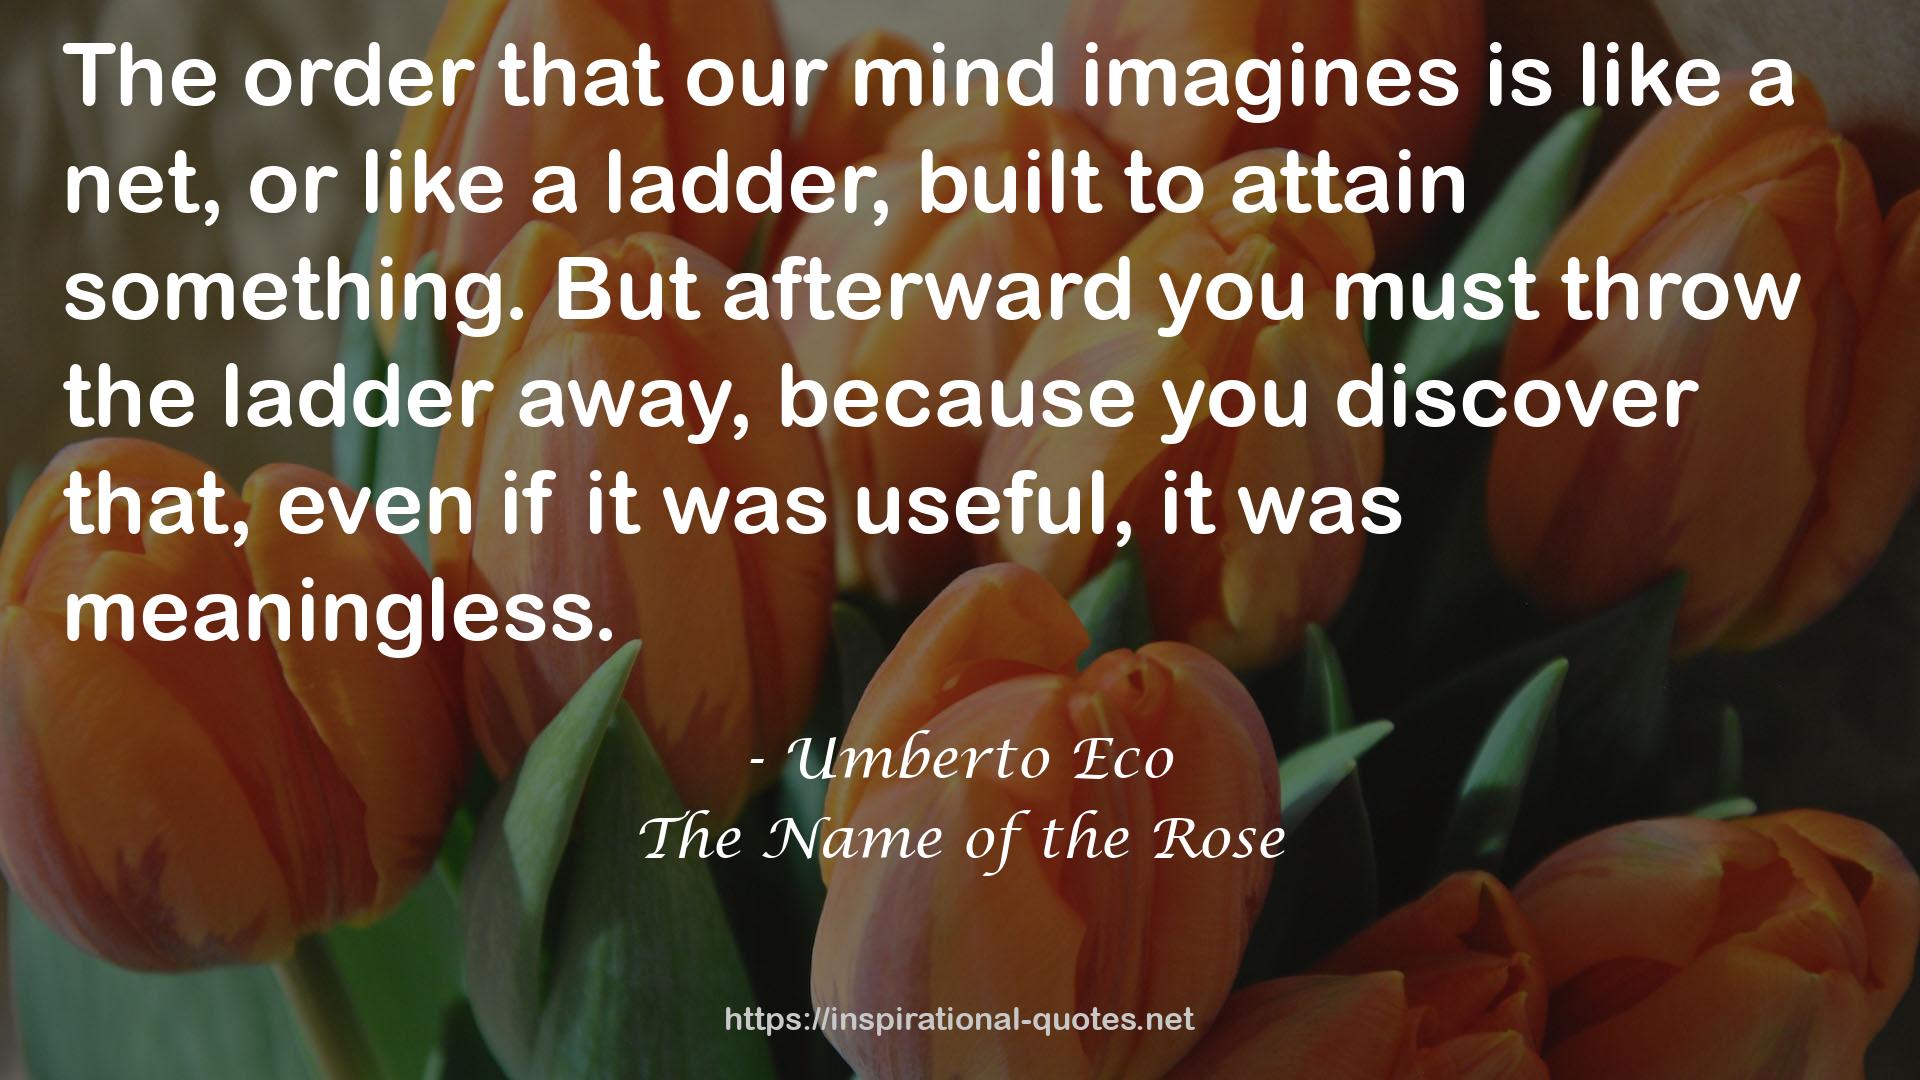 The Name of the Rose QUOTES